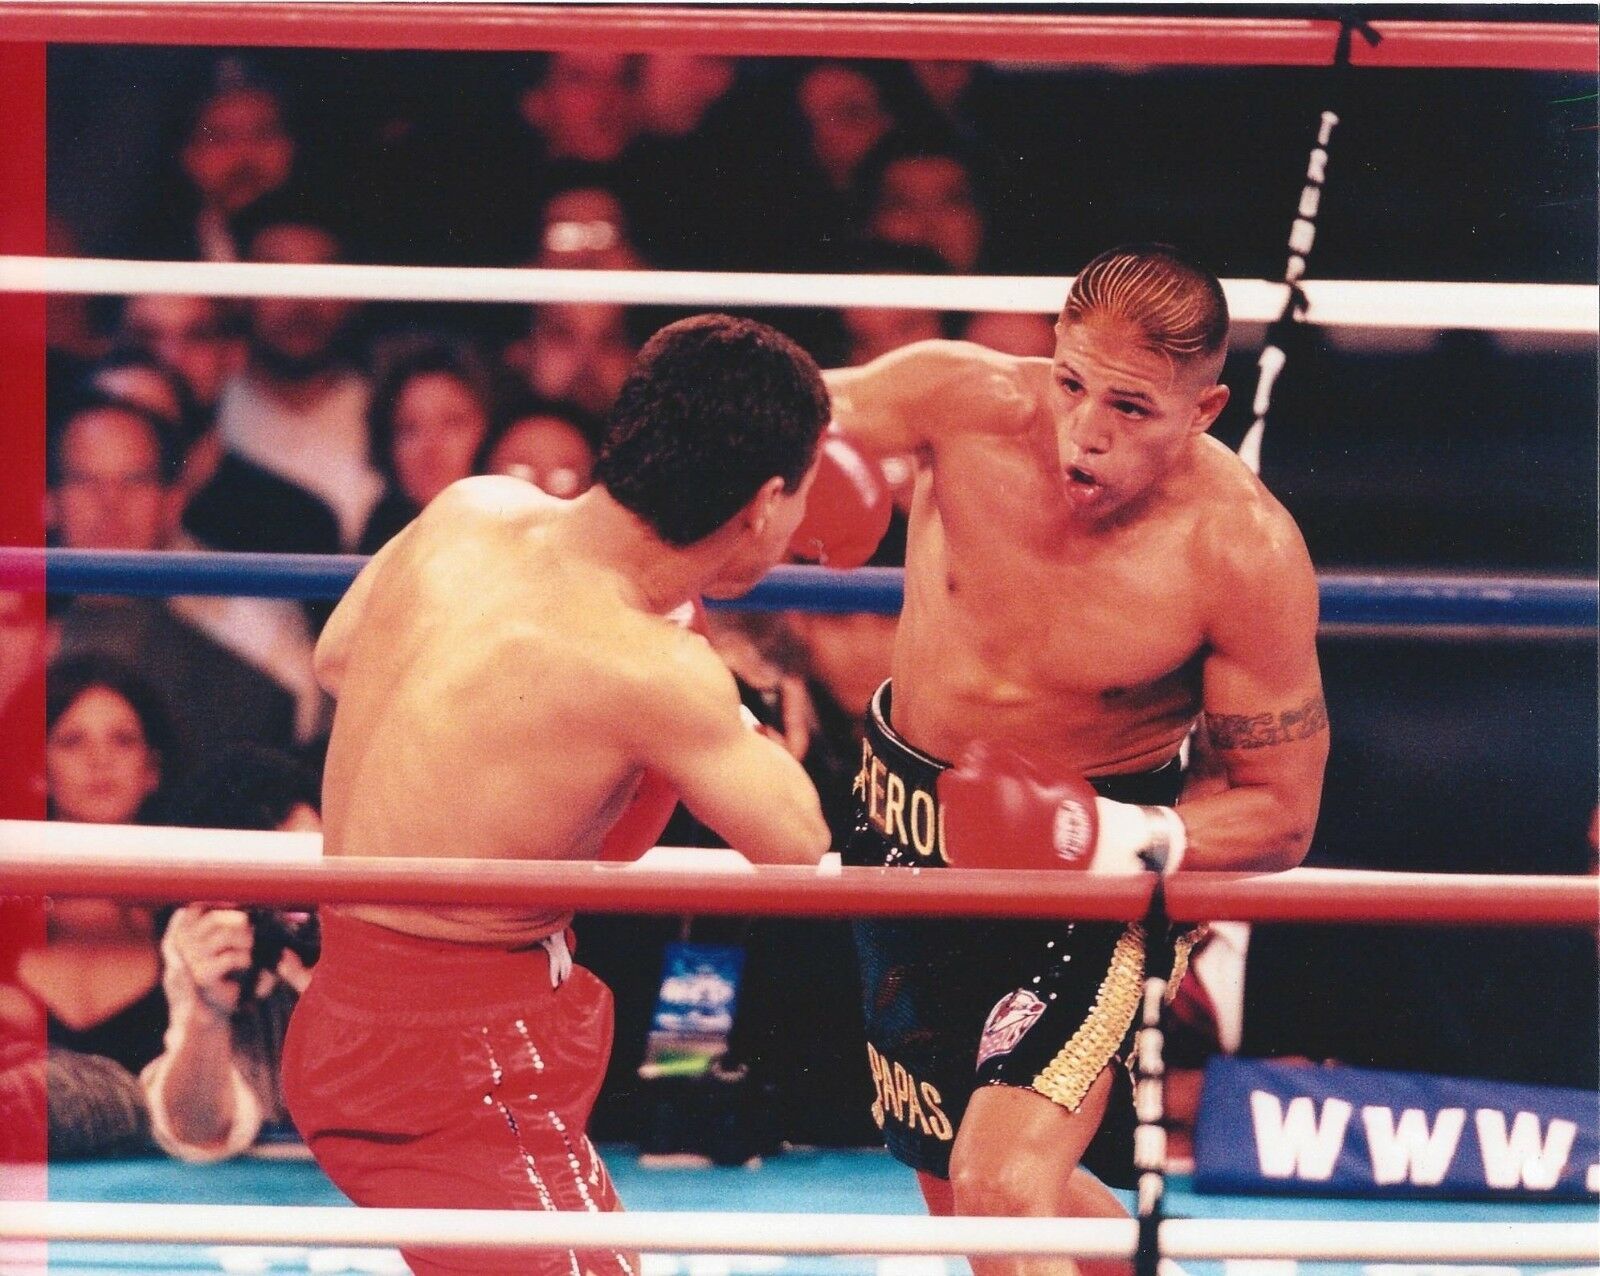 Primary image for FERNANDO VARGAS 8X10 PHOTO BOXING PICTURE RING ACTION